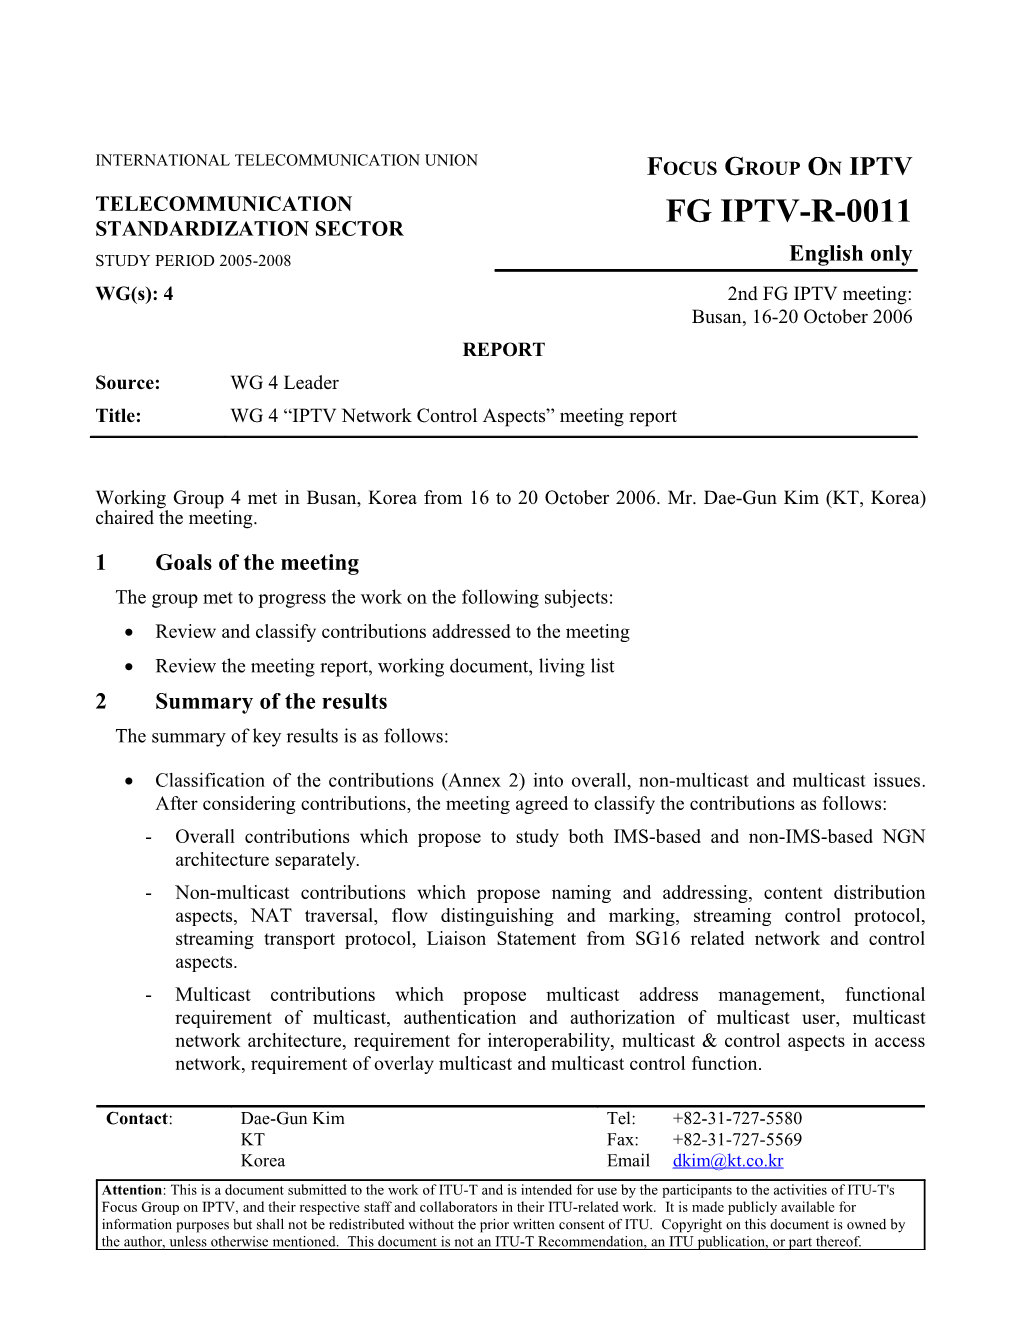 OUTPUT DOCUMENT: Meeting Report of IPTV Network Control Aspects